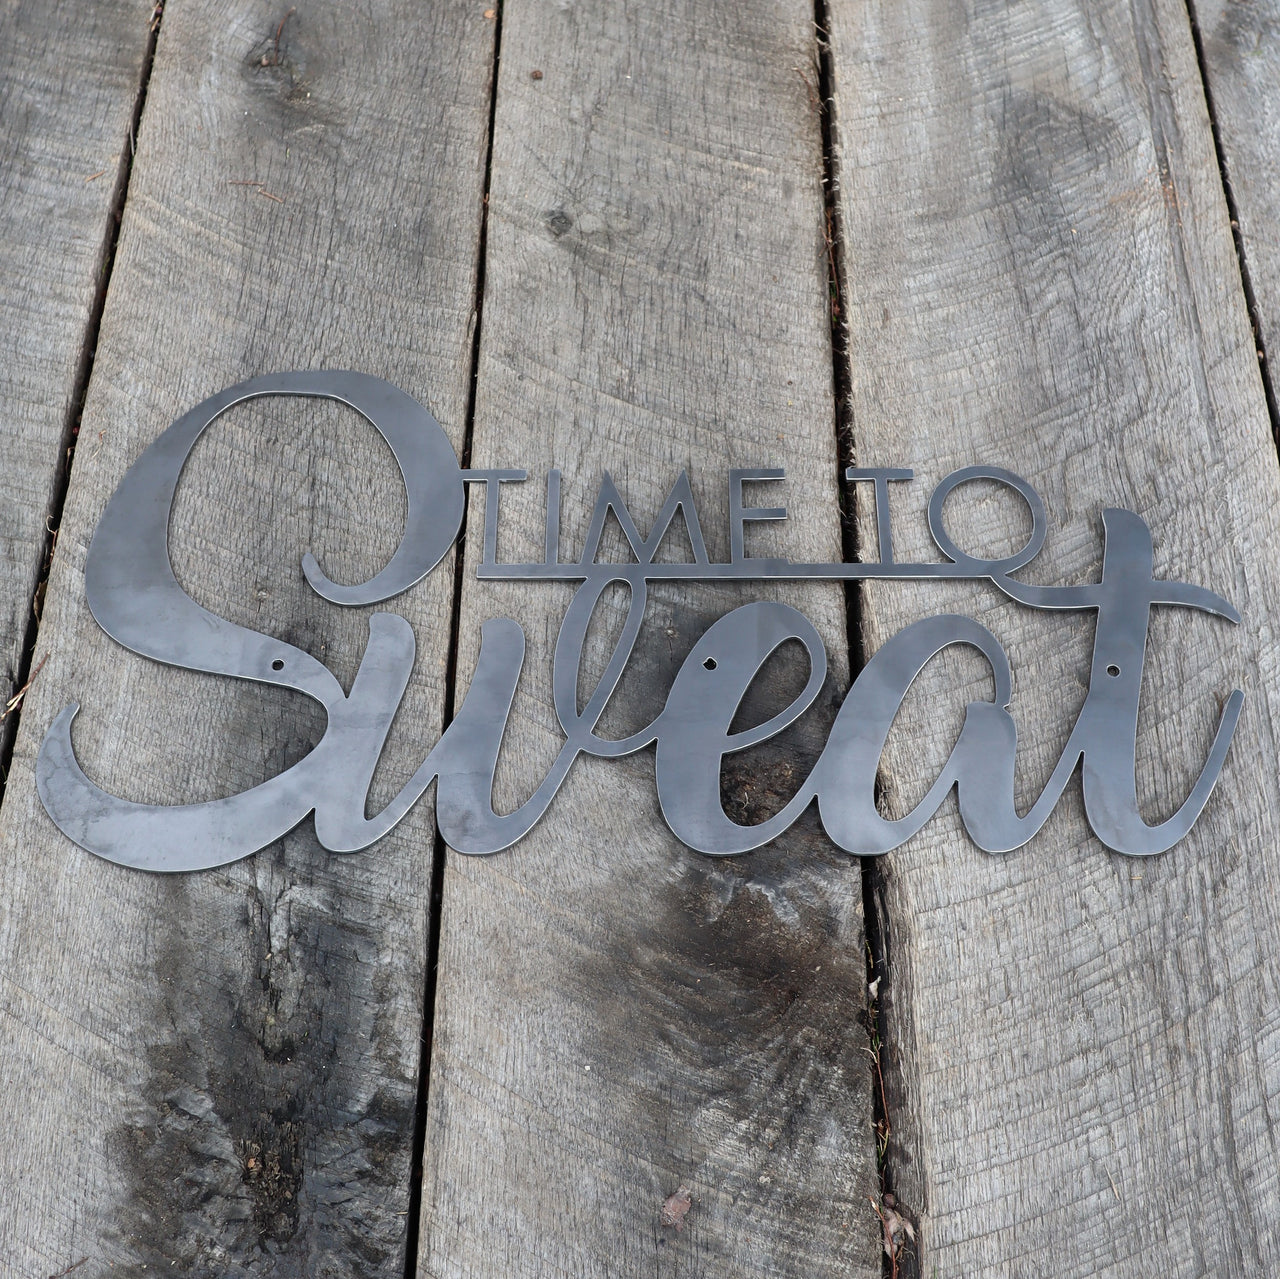 Time to Sweat - Home Gym Sign - Work Out, Exercise, Biking Decor